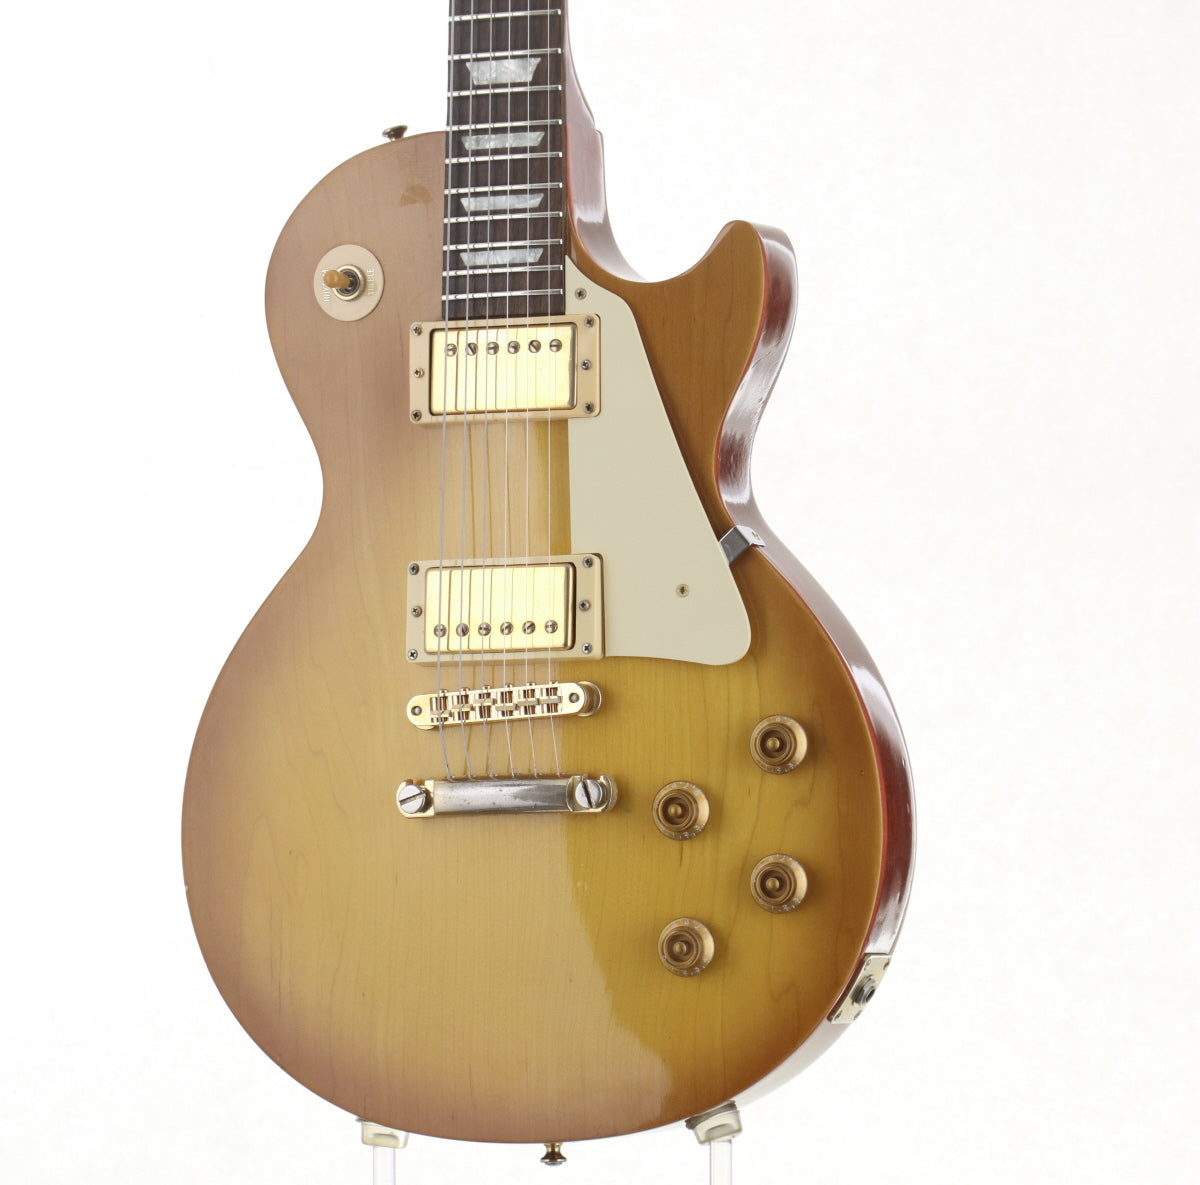 [SN 00495343] USED Gibson / Les Paul Studio with a broken neck, made in 2005 [06]